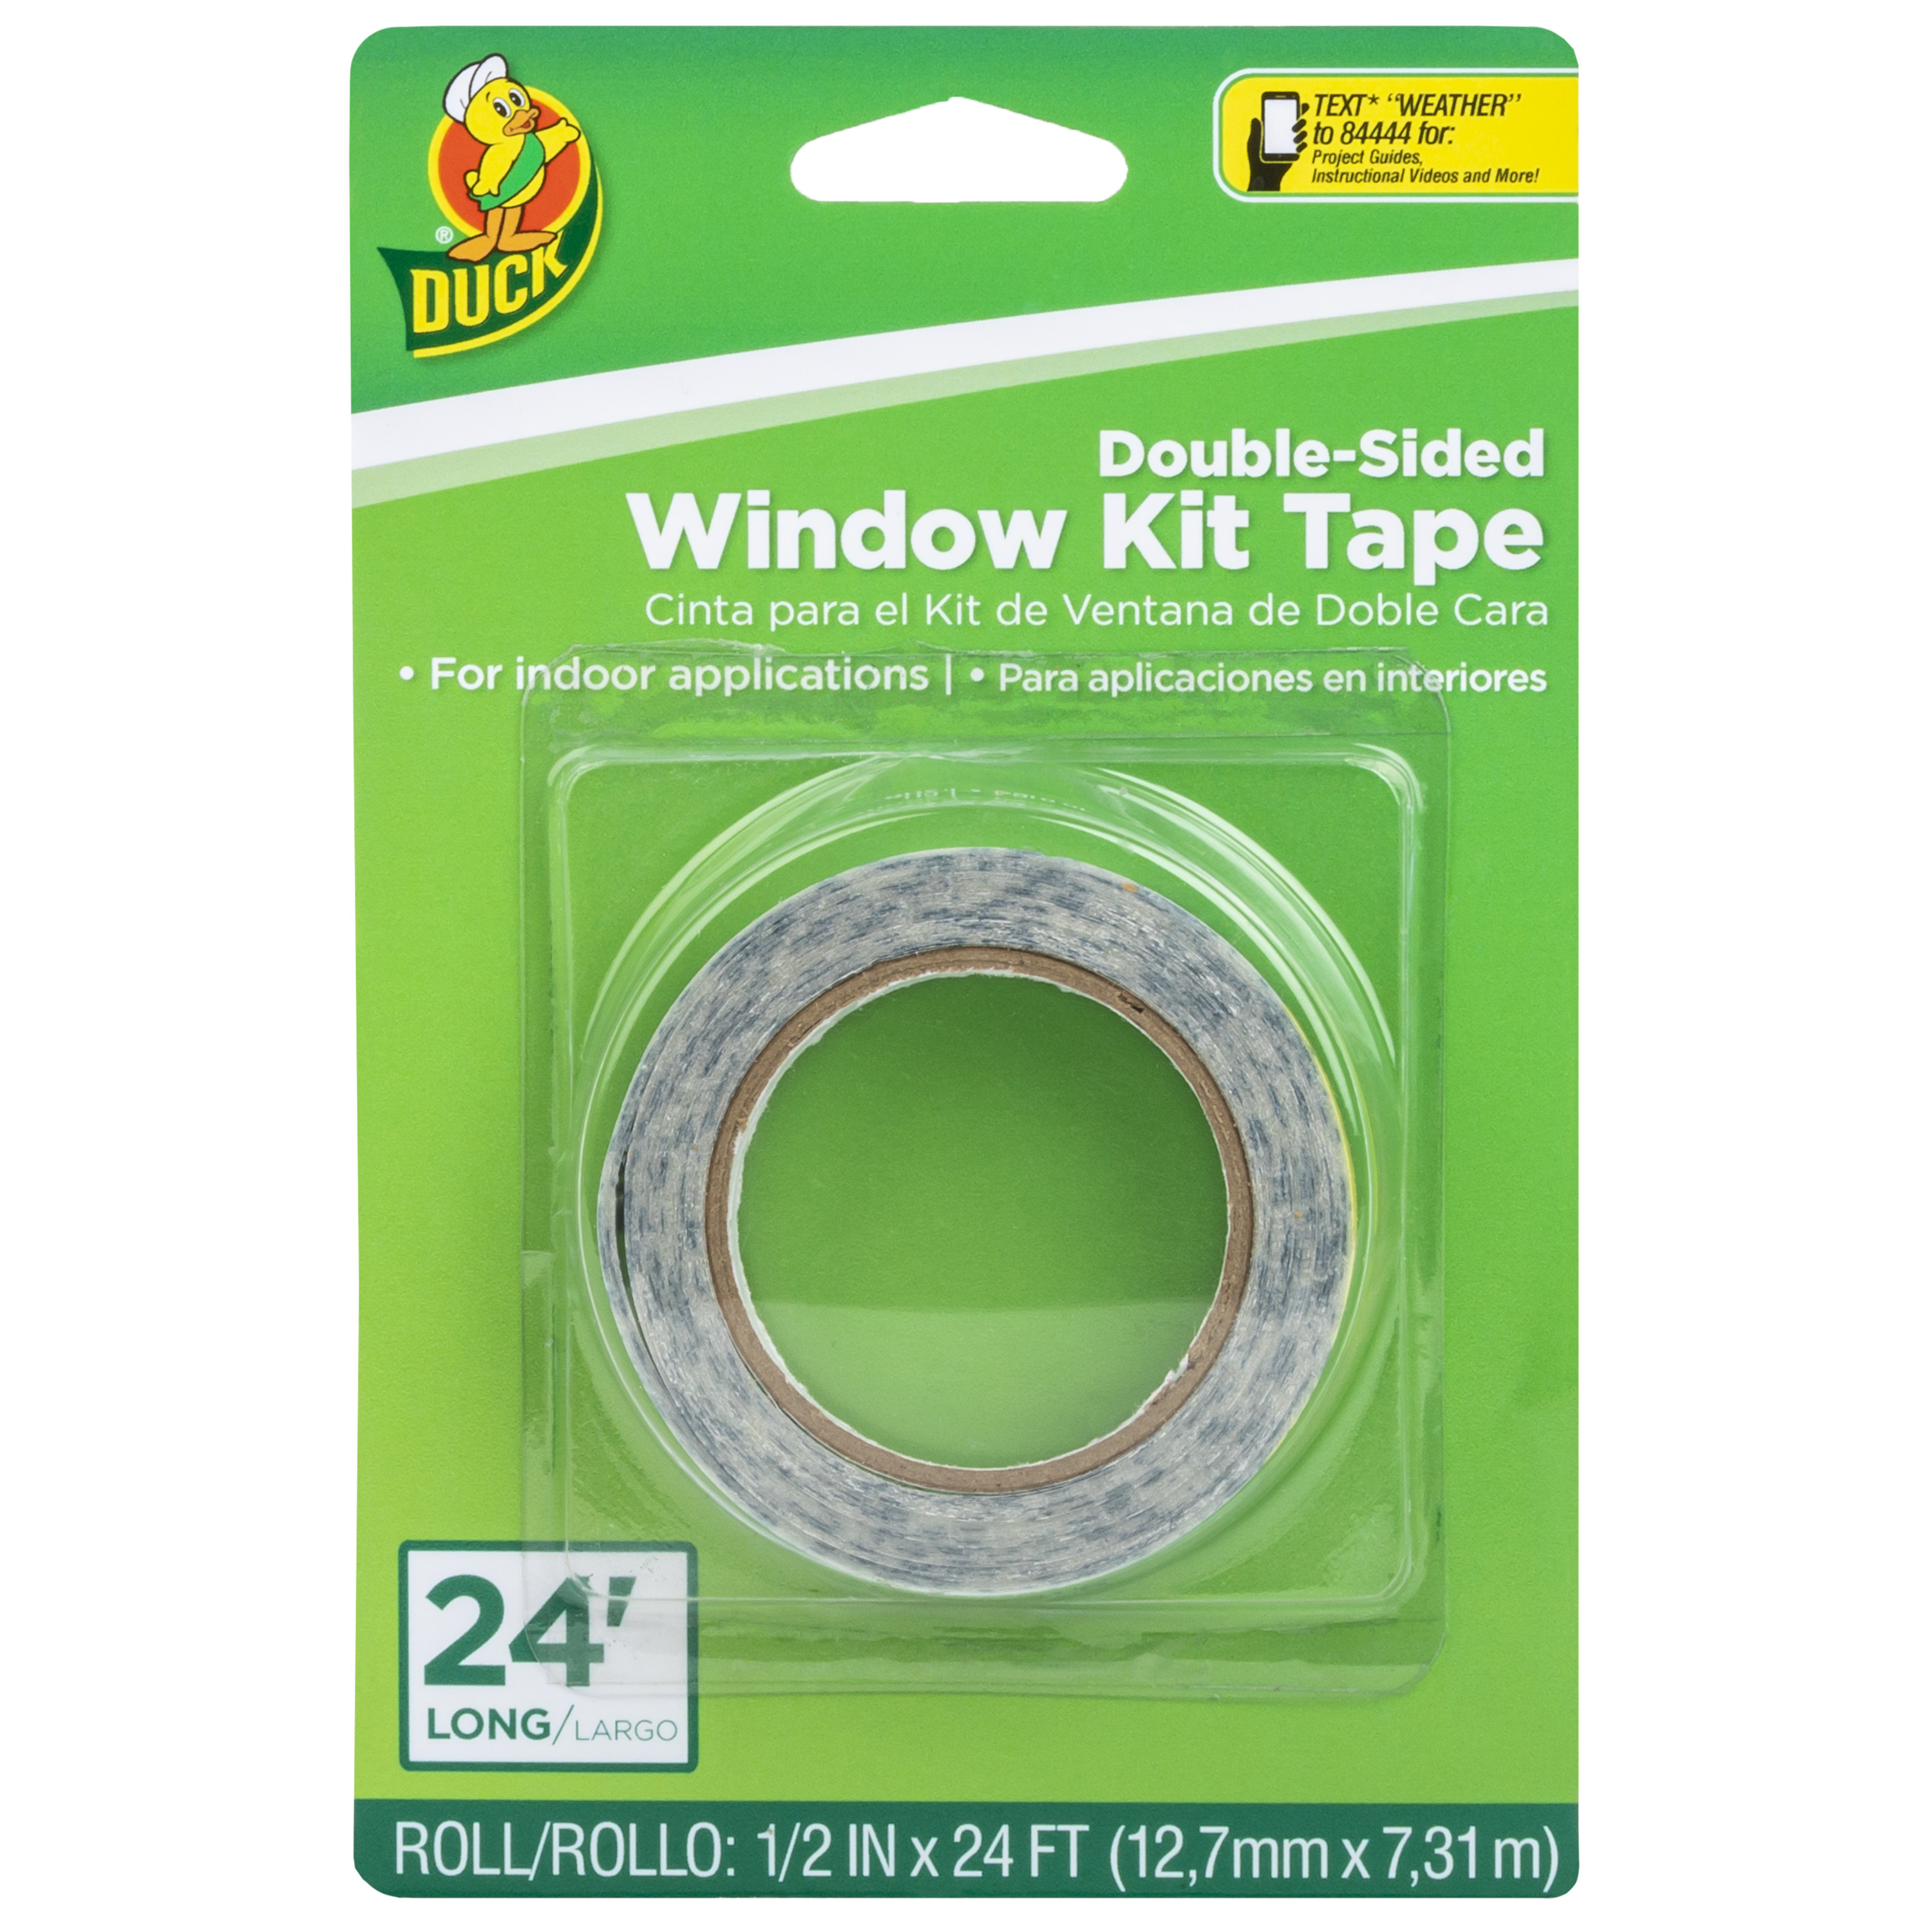 Duck Brand Clear Double-Sided Indoor Window Kit Tape, .25 in. x 24 ft. - image 1 of 10